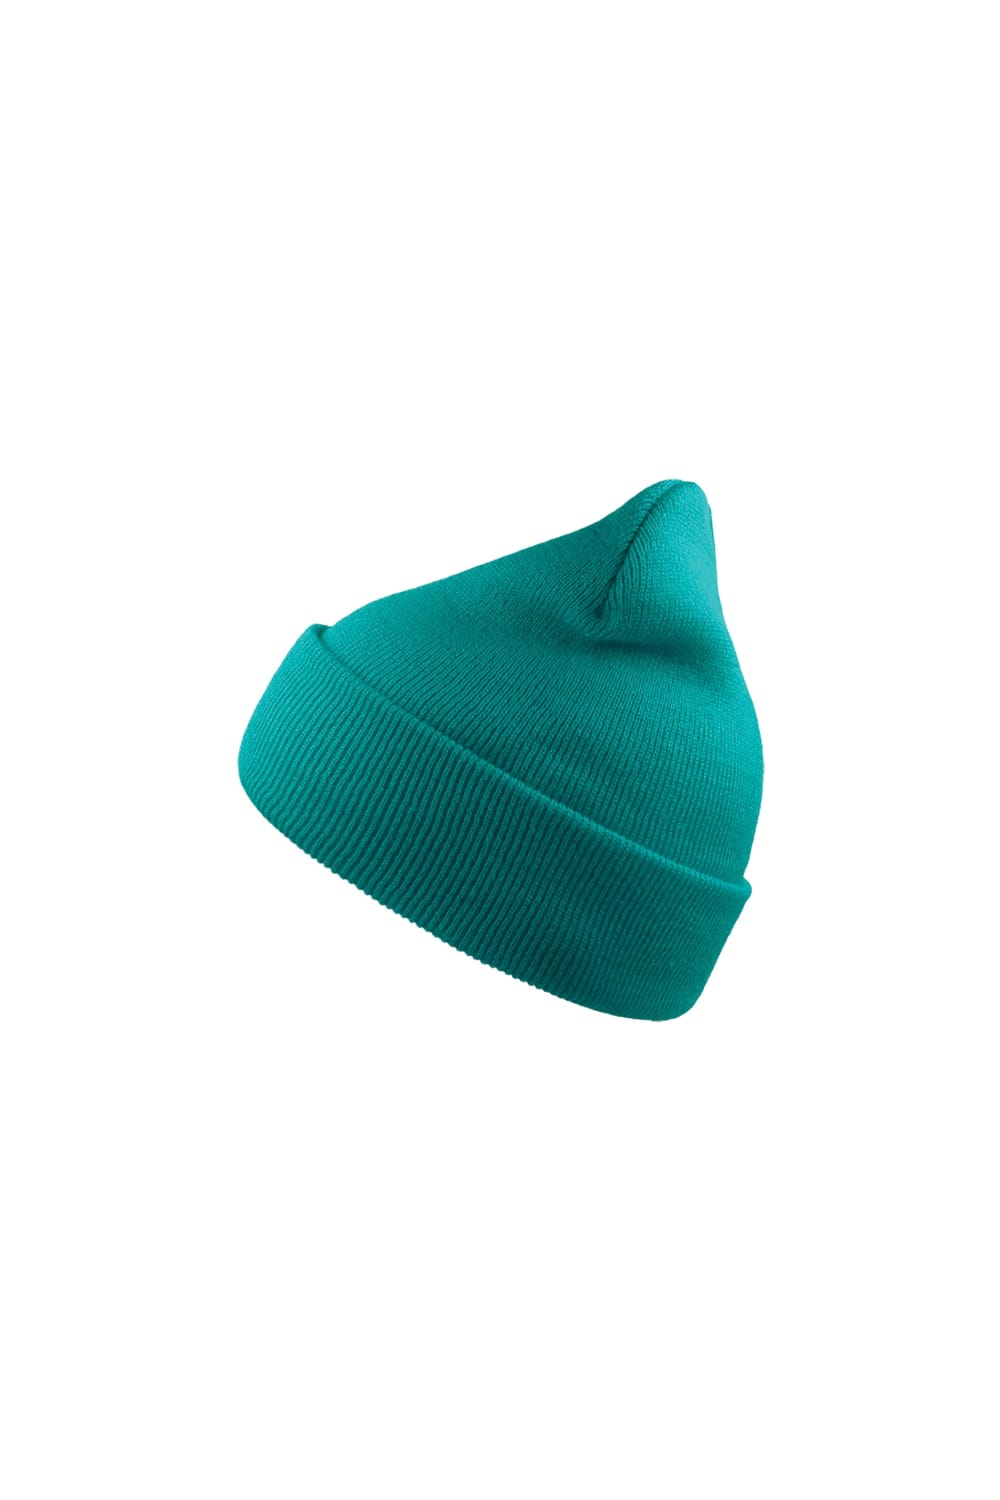 Wind Double Skin Beanie With Turn Up (Turquoise)